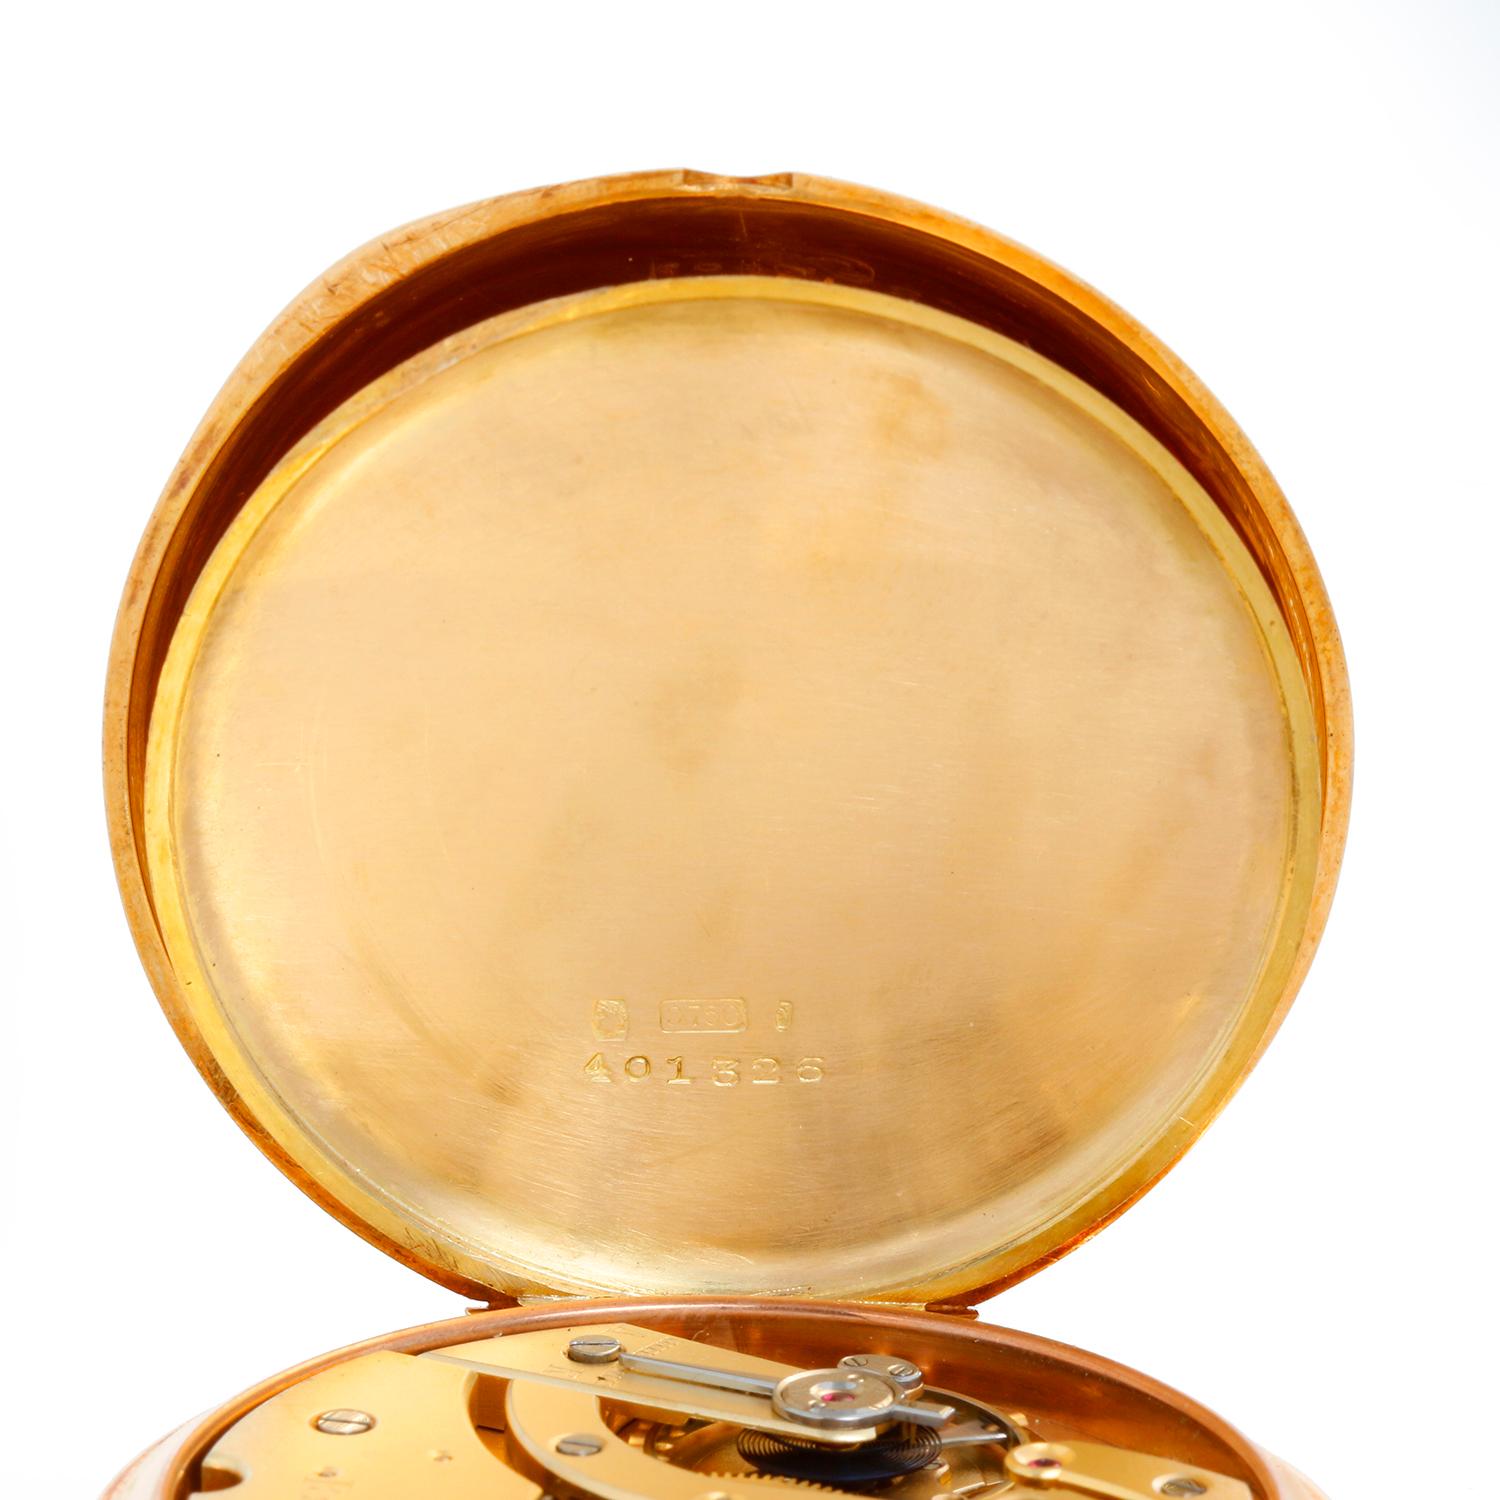 pocket watch with roman numerals